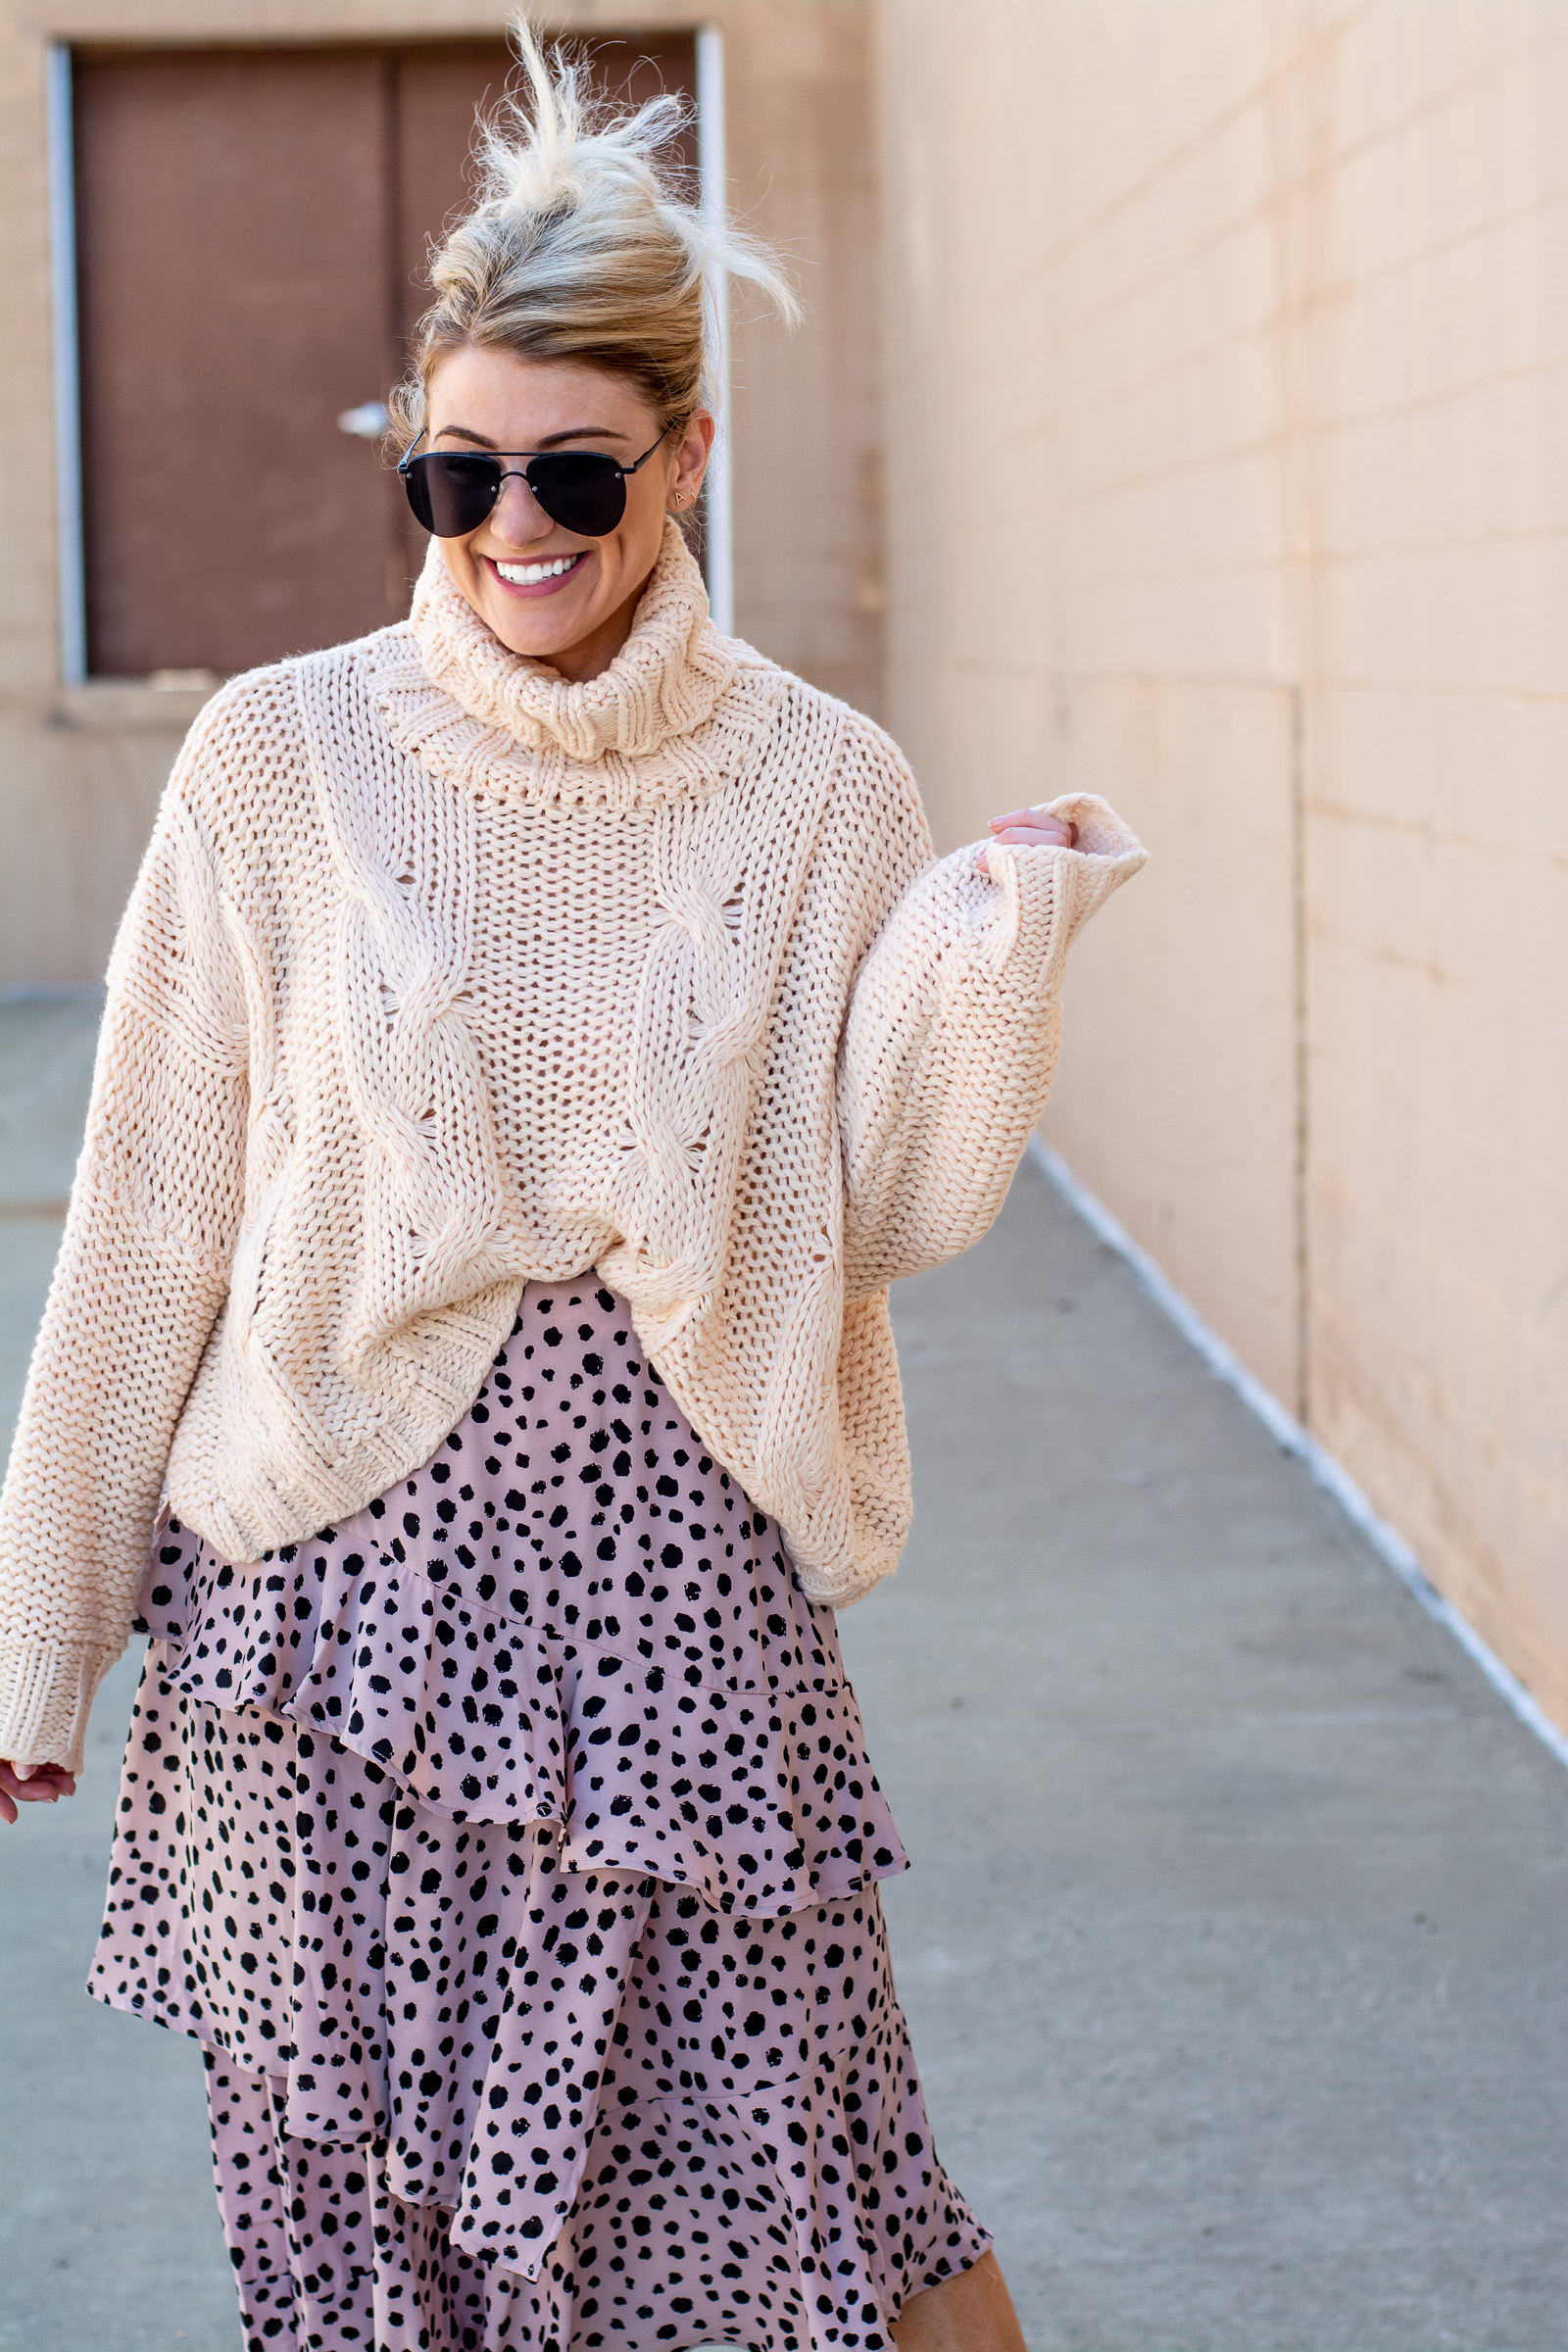 Fall Outfit: Sweater and a Ruffled Skirt. | LSR